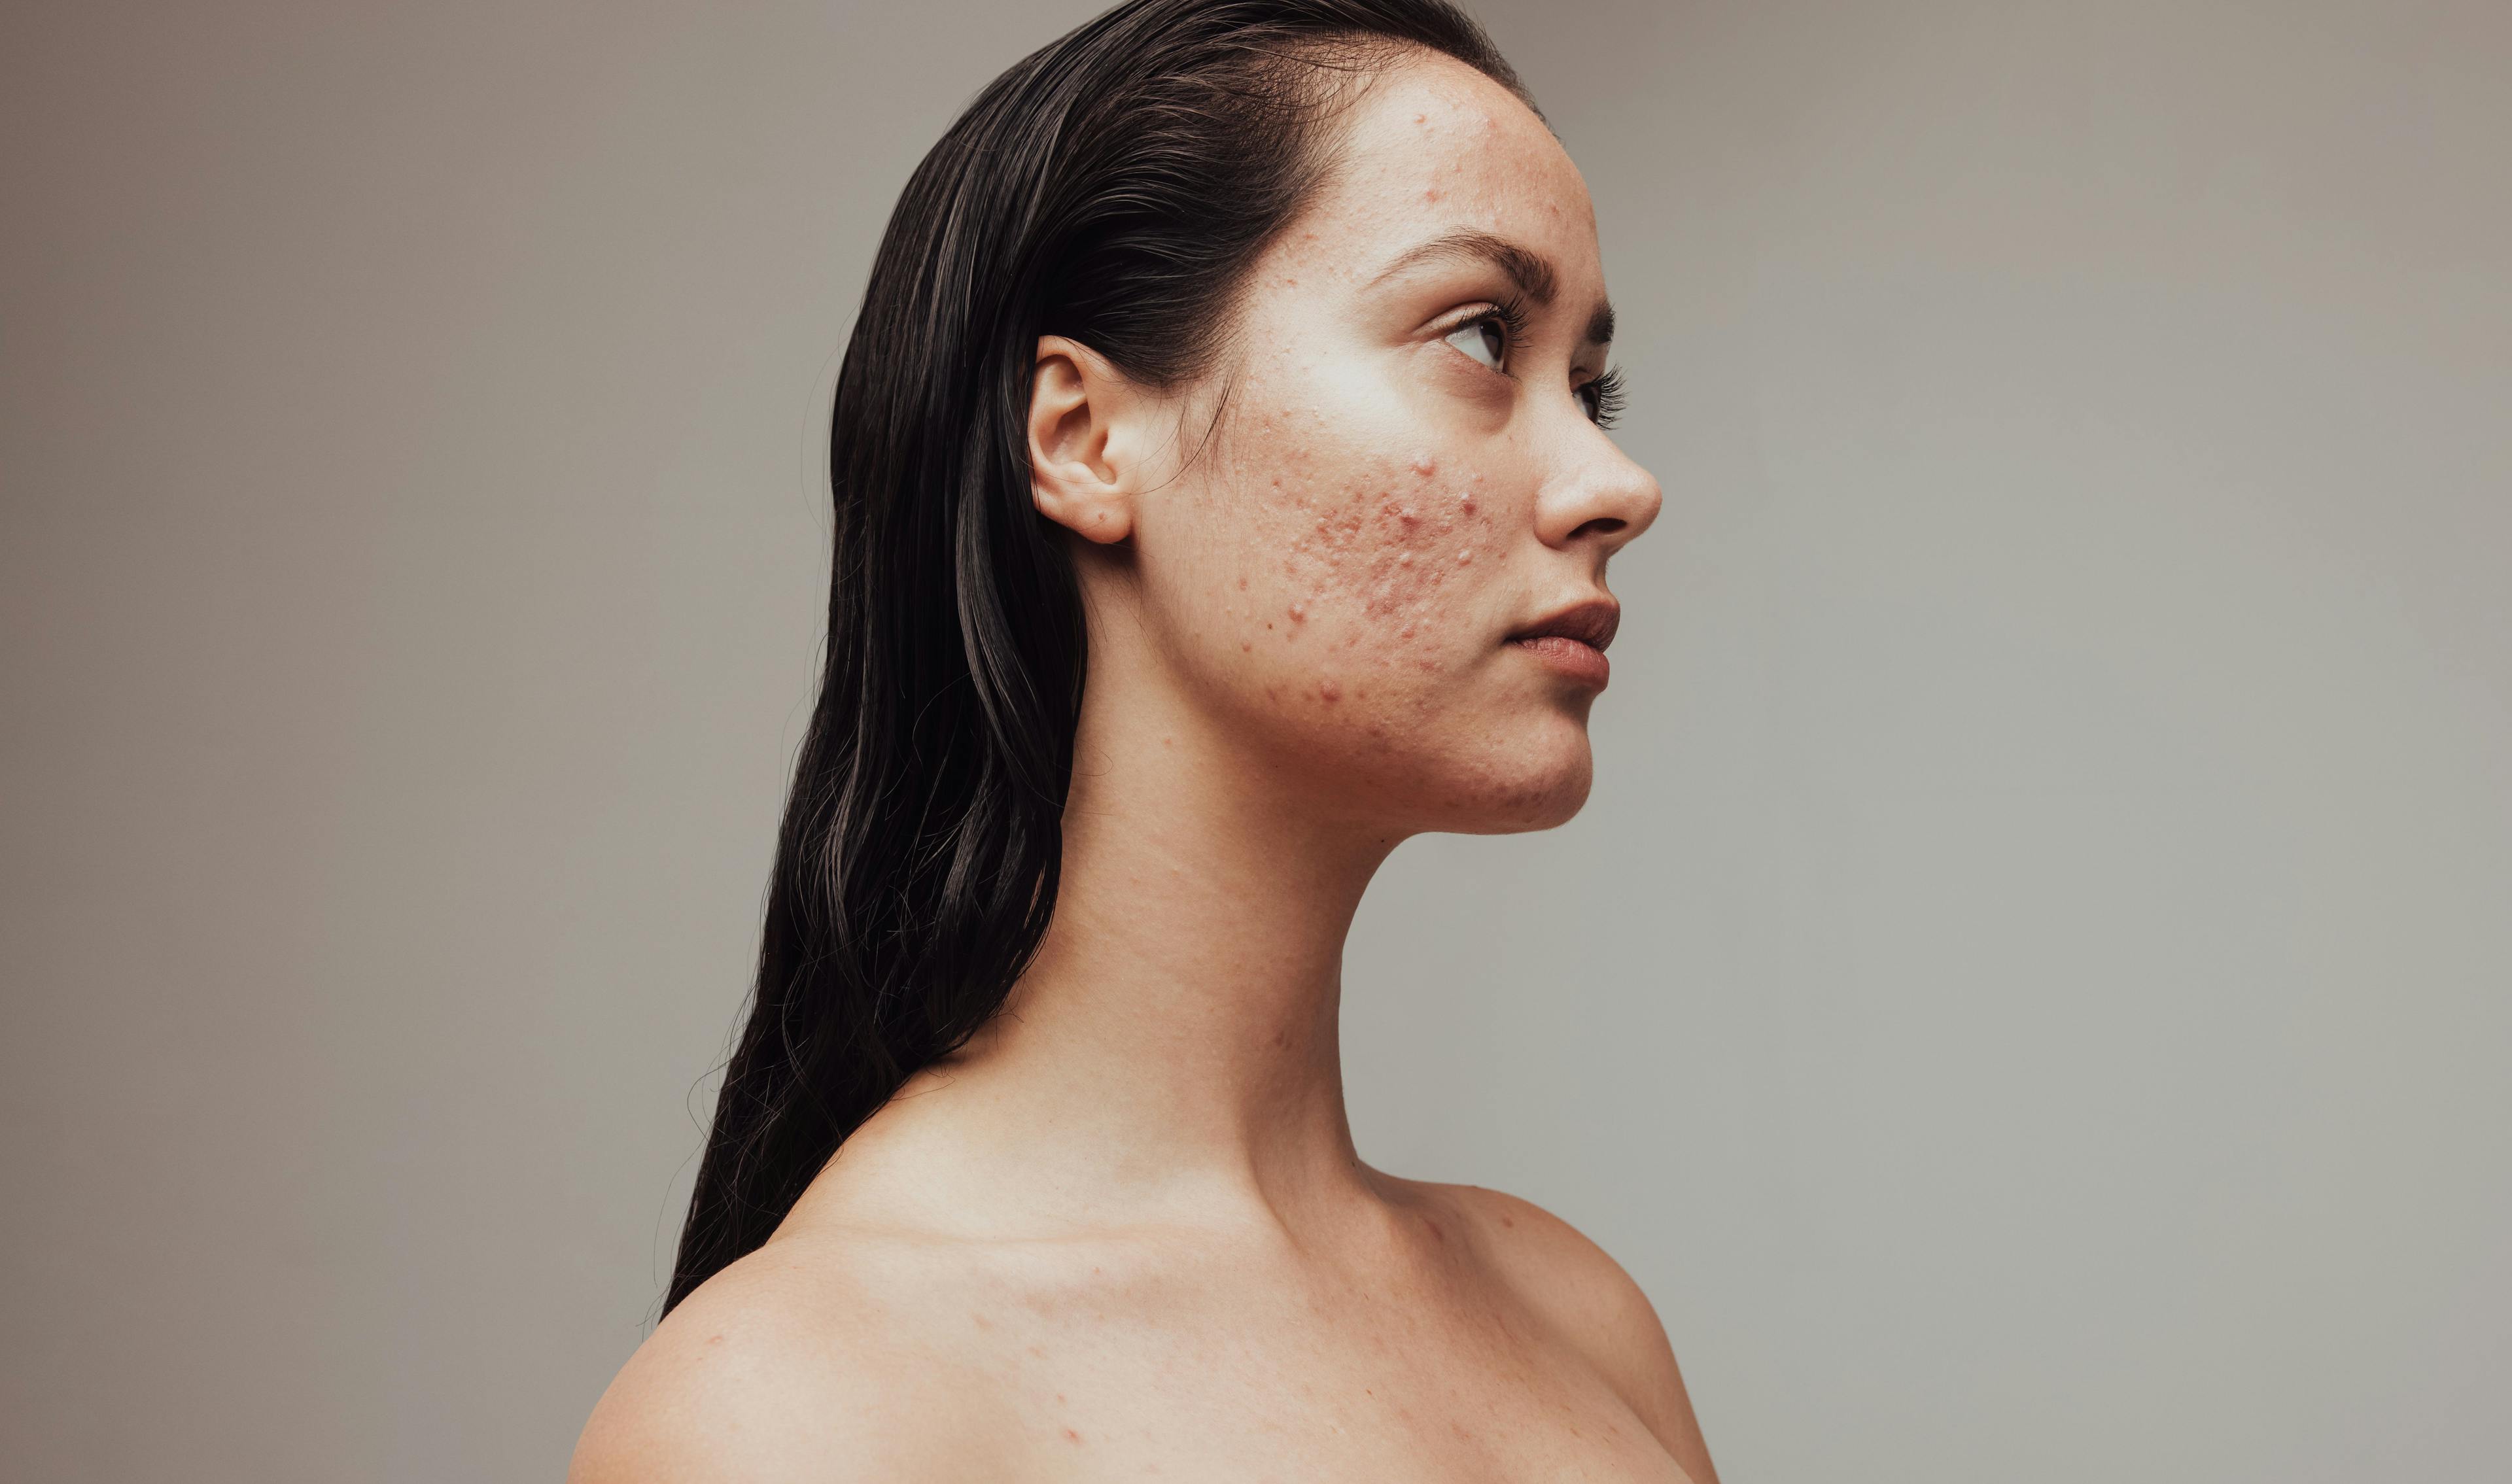 Spironolactone found to be effective alternative to oral antibiotics for women with acne | Image Credit: © Jacob Lund - © Jacob Lund - stock.adobe.com.